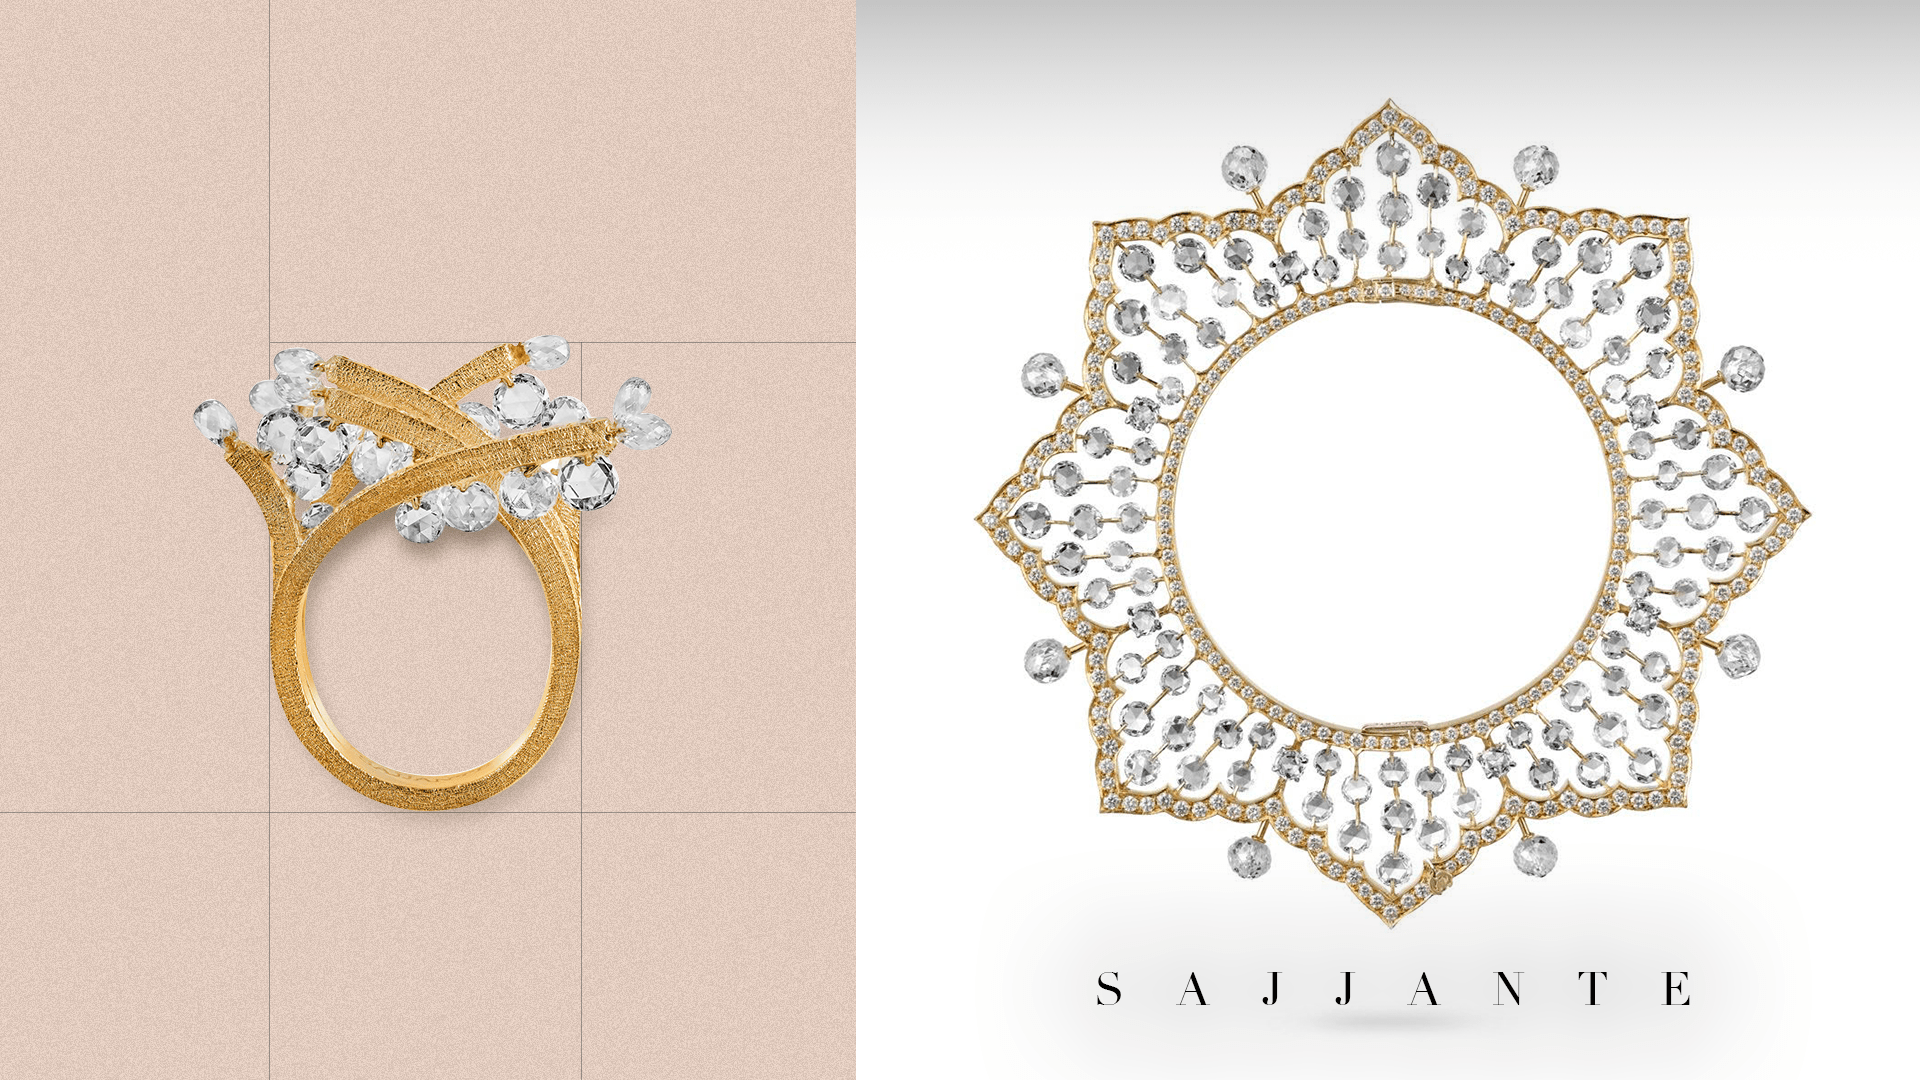 Sajjante Jewellery - Timeless Beauty and Exceptional Craftsmanship